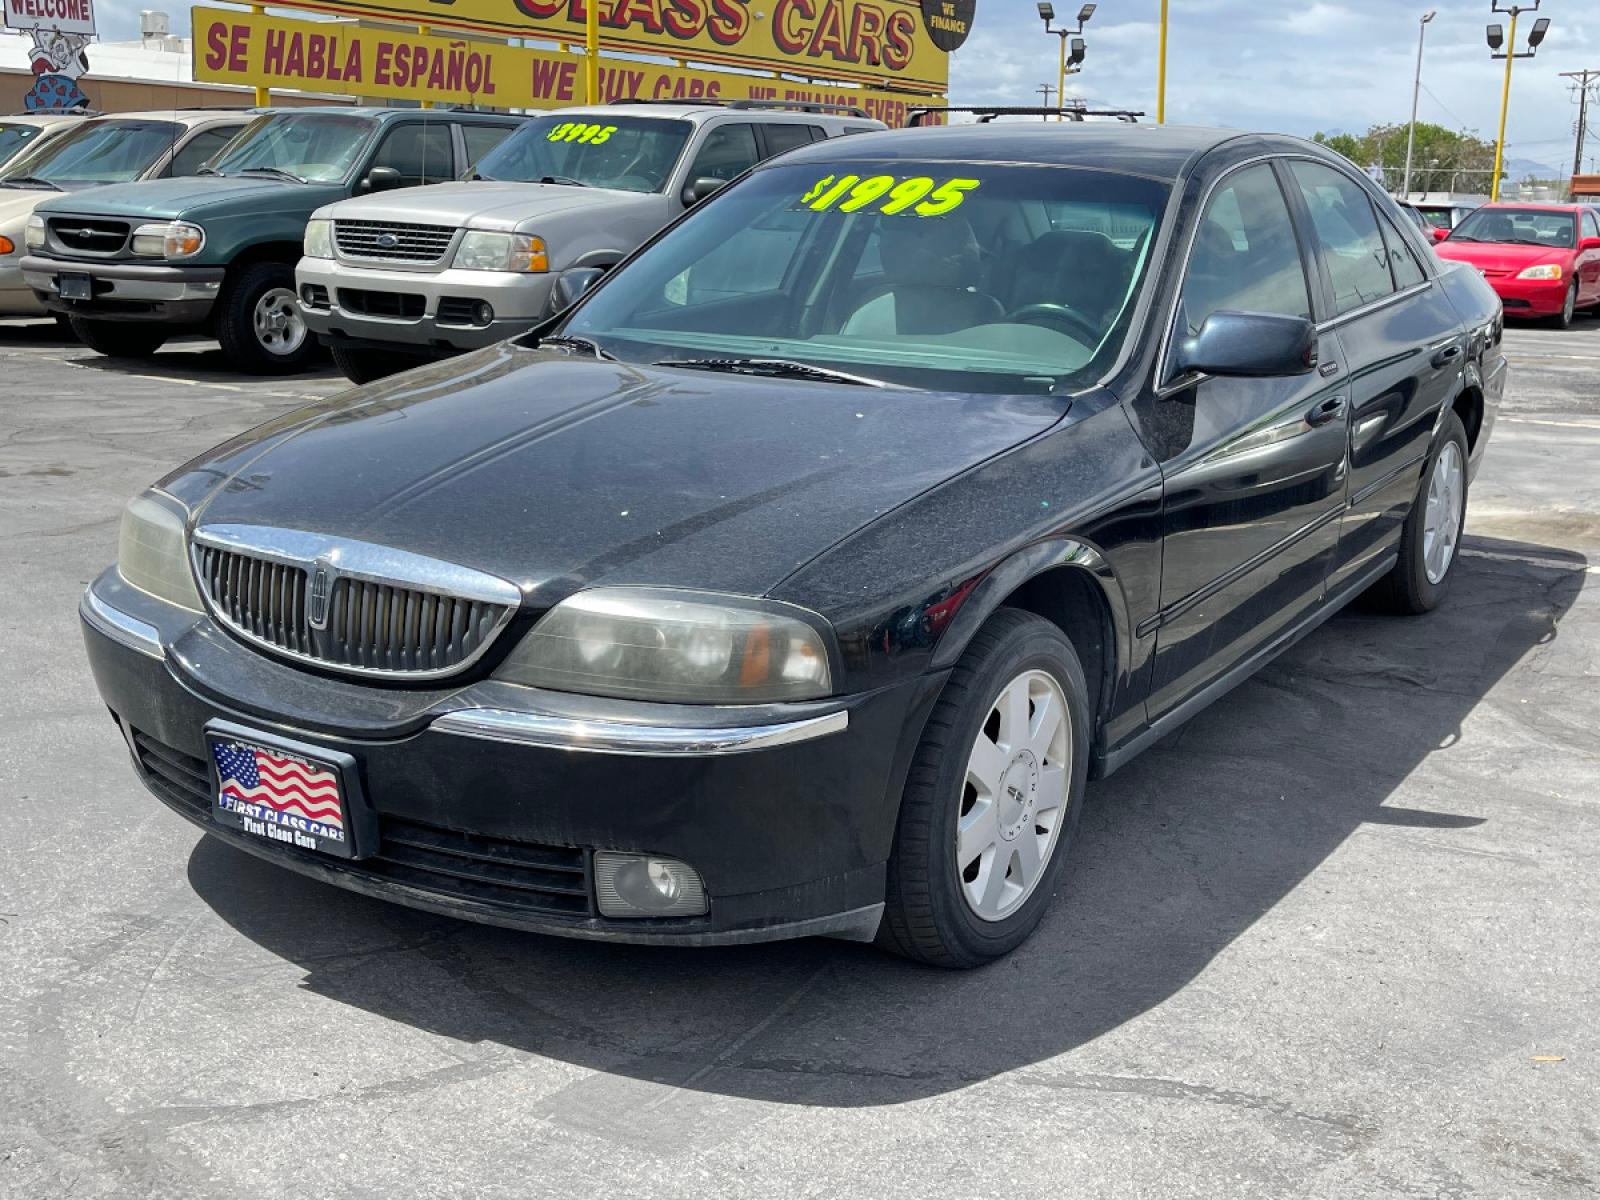 First Class Cars - 2004 Lincoln LS V6 #656698 *MECHANIC SPECIAL! AS-IS!*